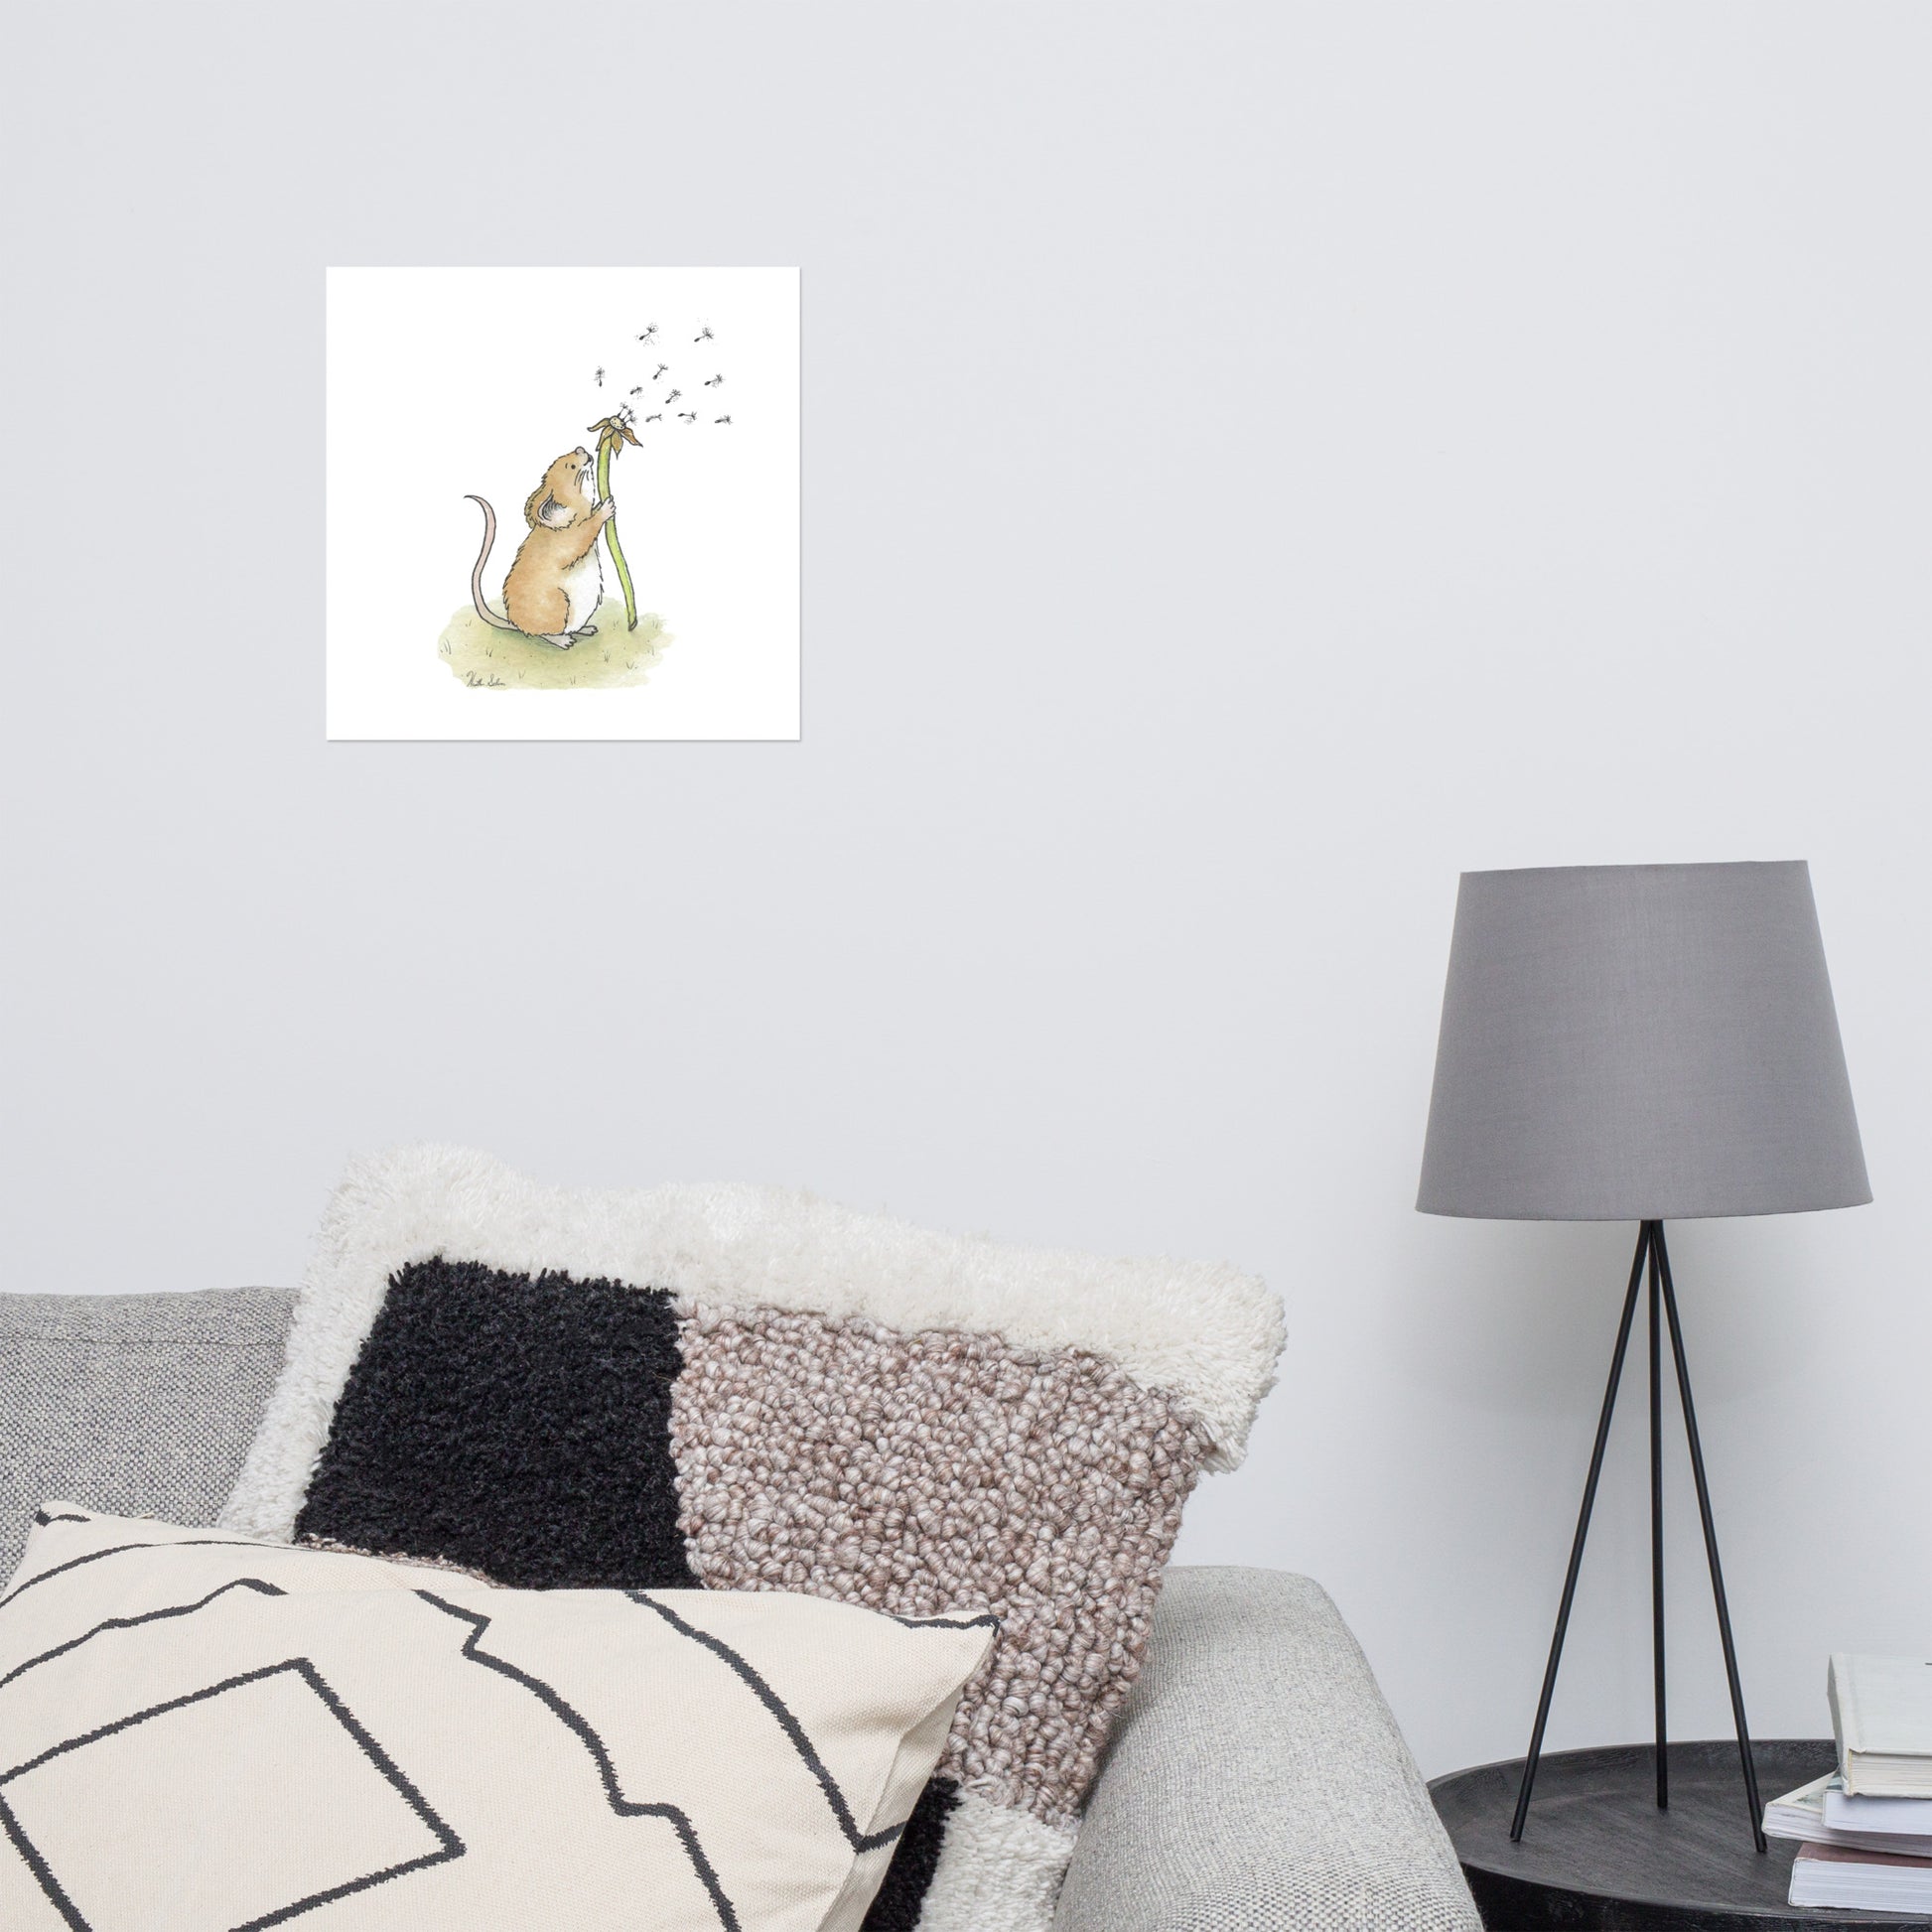 14x14 matte paper art print. Giclée quality printing. Design is a watercolor painting of a cute mouse blowing the seeds off a dandelion stem. Shown on the wall above a grey couch and lamp.